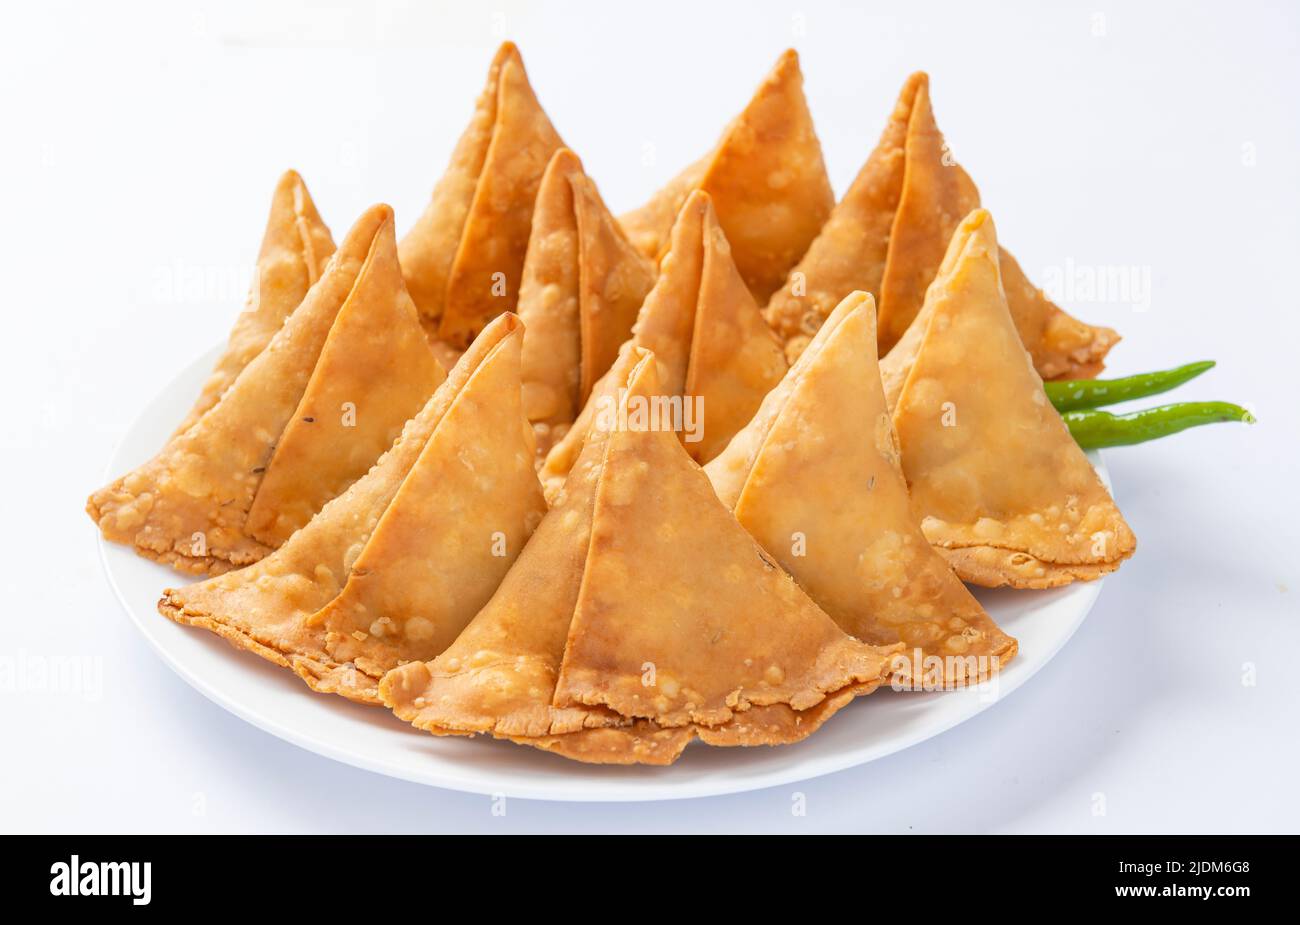 Potato Samosa or Aloo Samosa is a very popular snack food of asian people. It is made by mashed potatoes and spices and filled in dough sheets. Stock Photo